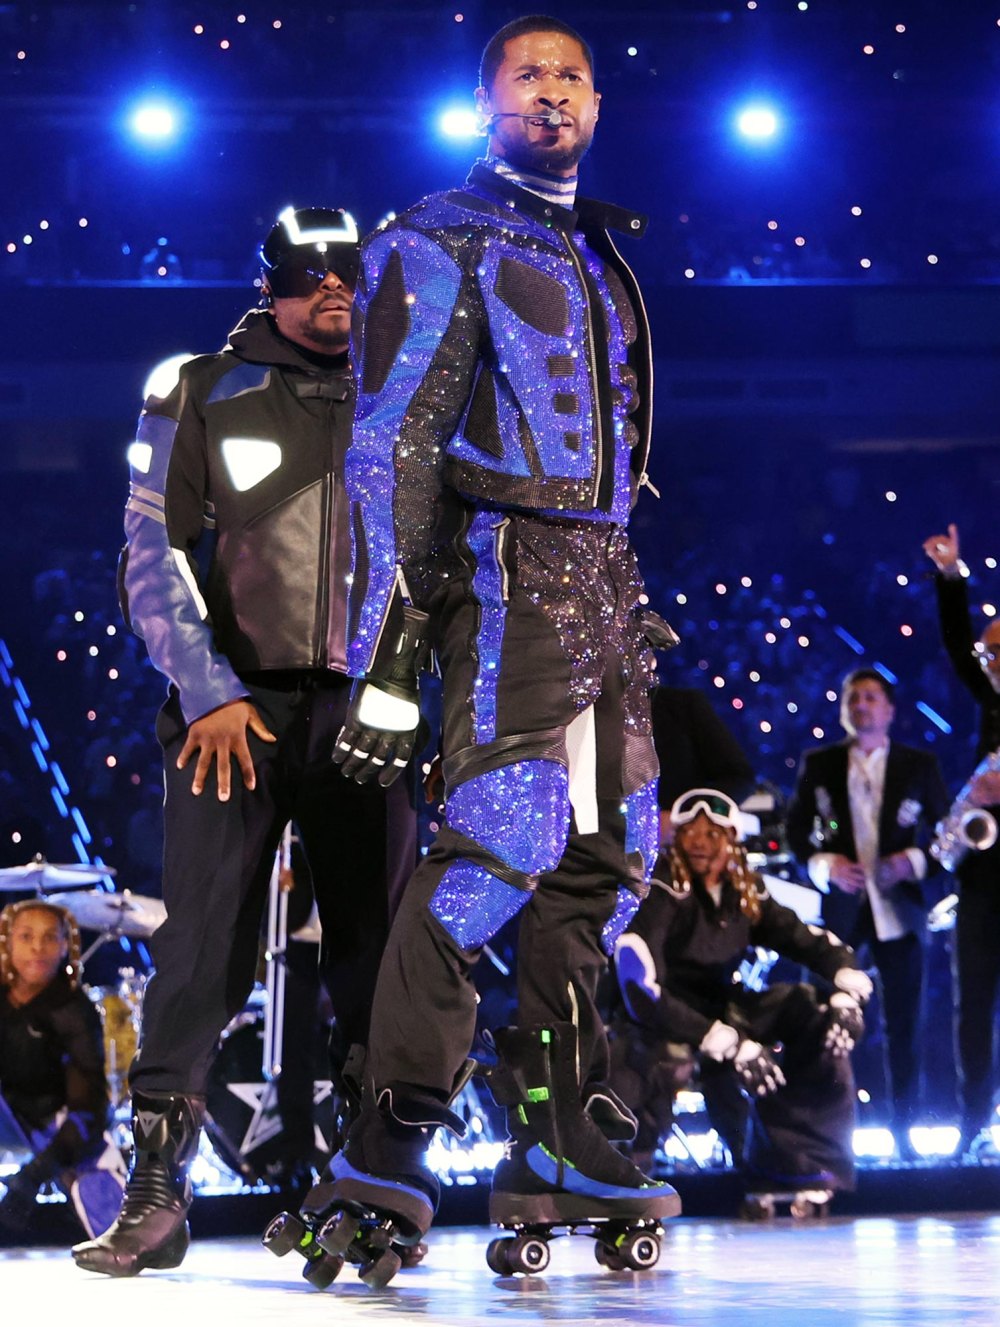 Usher Works With Off White to Design Bedazzled Blue and Black Roller Skating Look at the Super Bowl